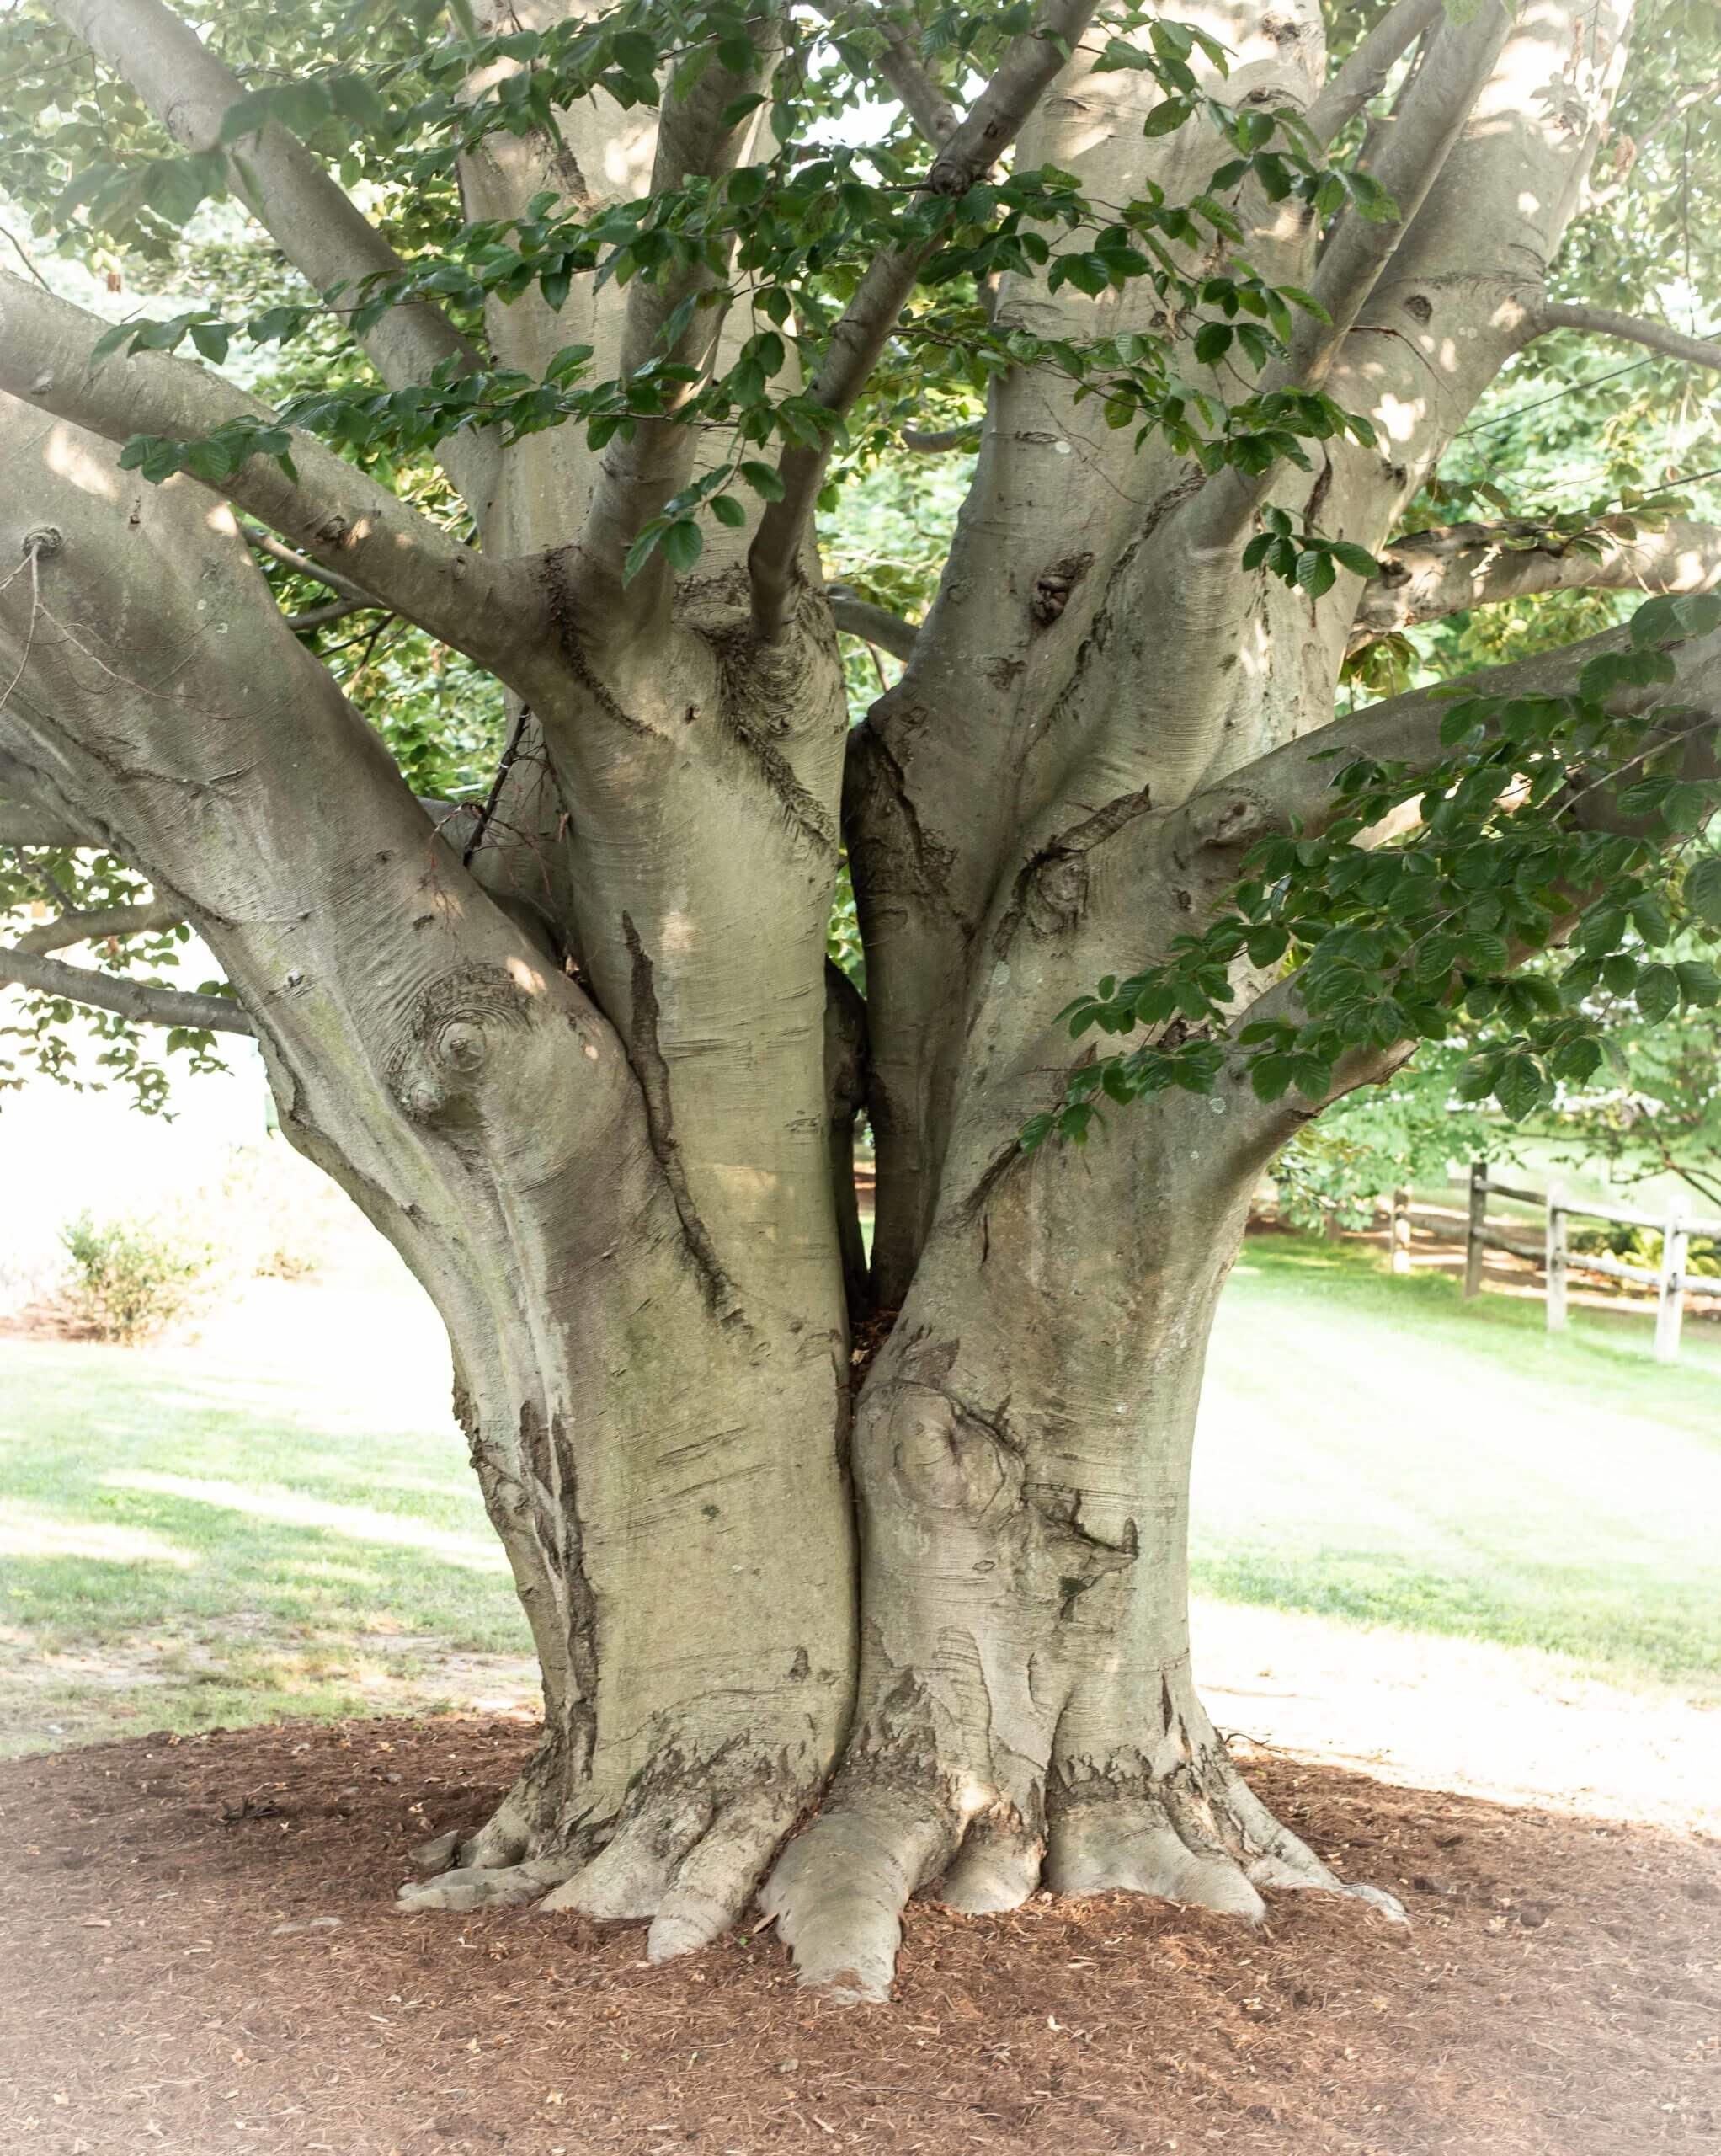 Color photo of large tree that has two trunks grown together at the base.